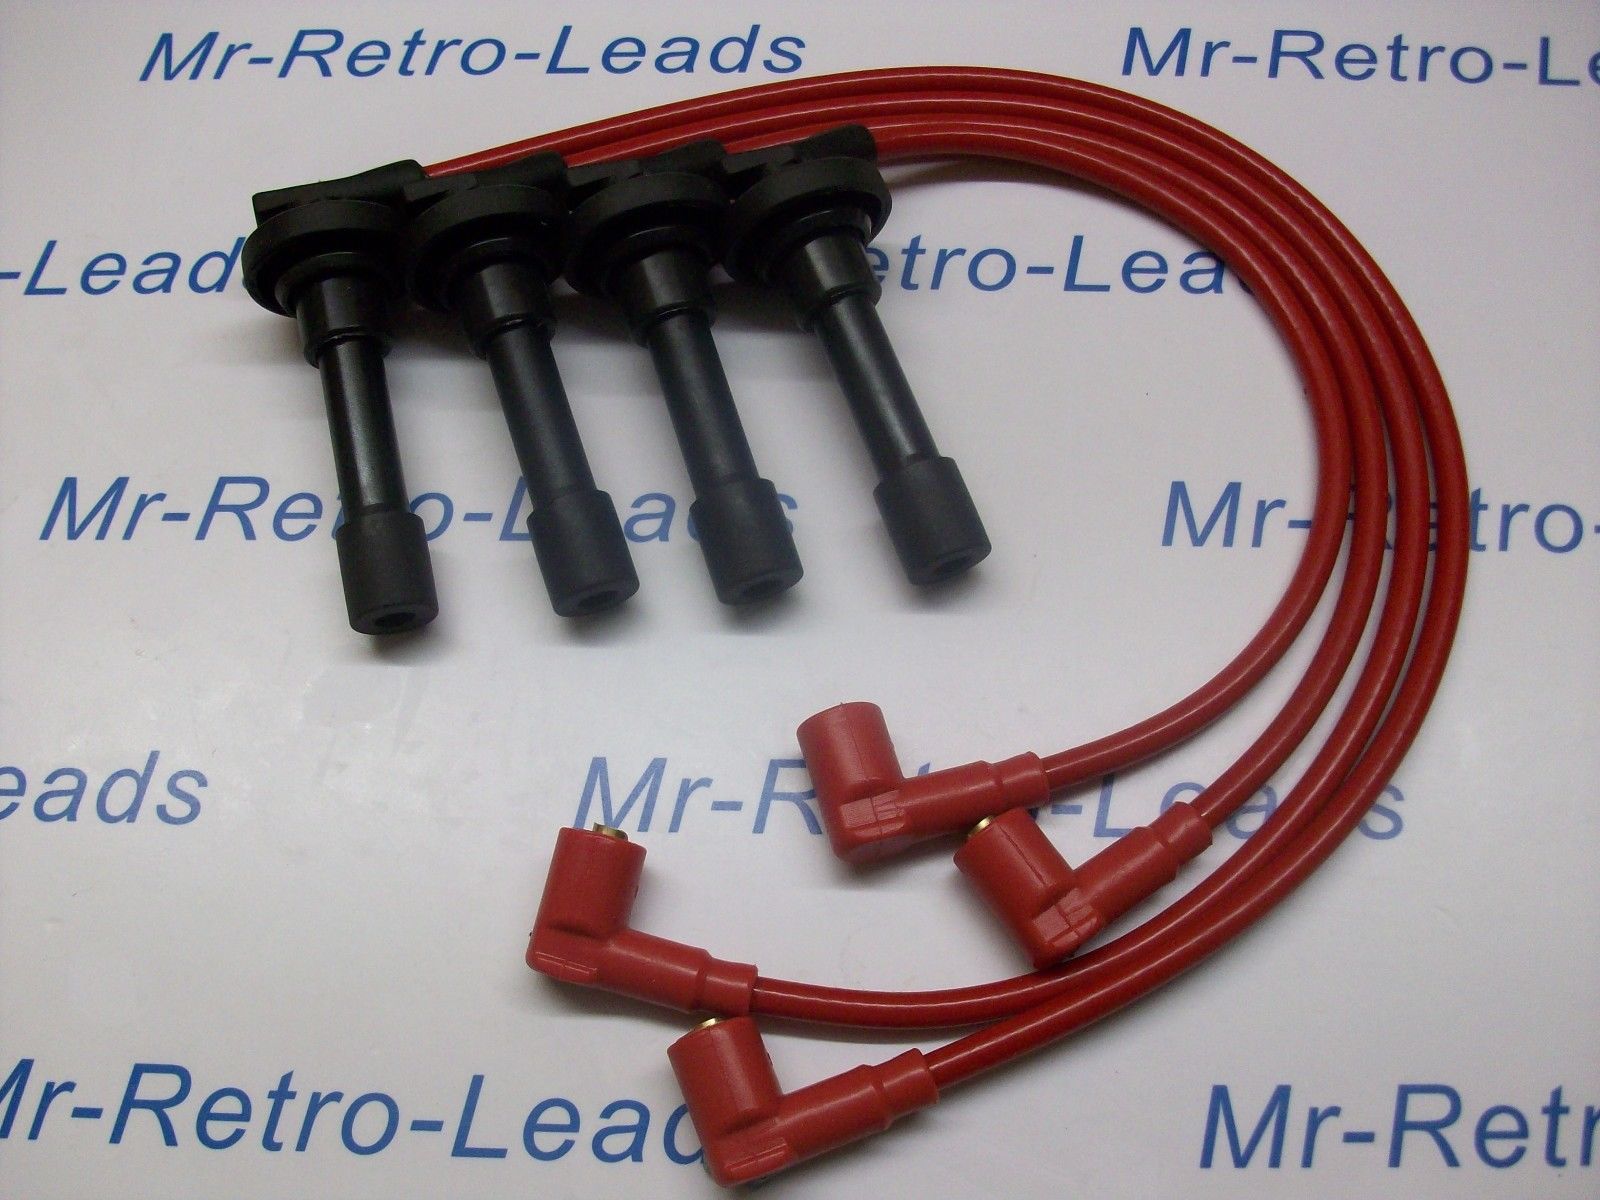 Red 8.5mm Performance Ignition Leads For Honda Civic D16 Dohc Engines Quality Ht